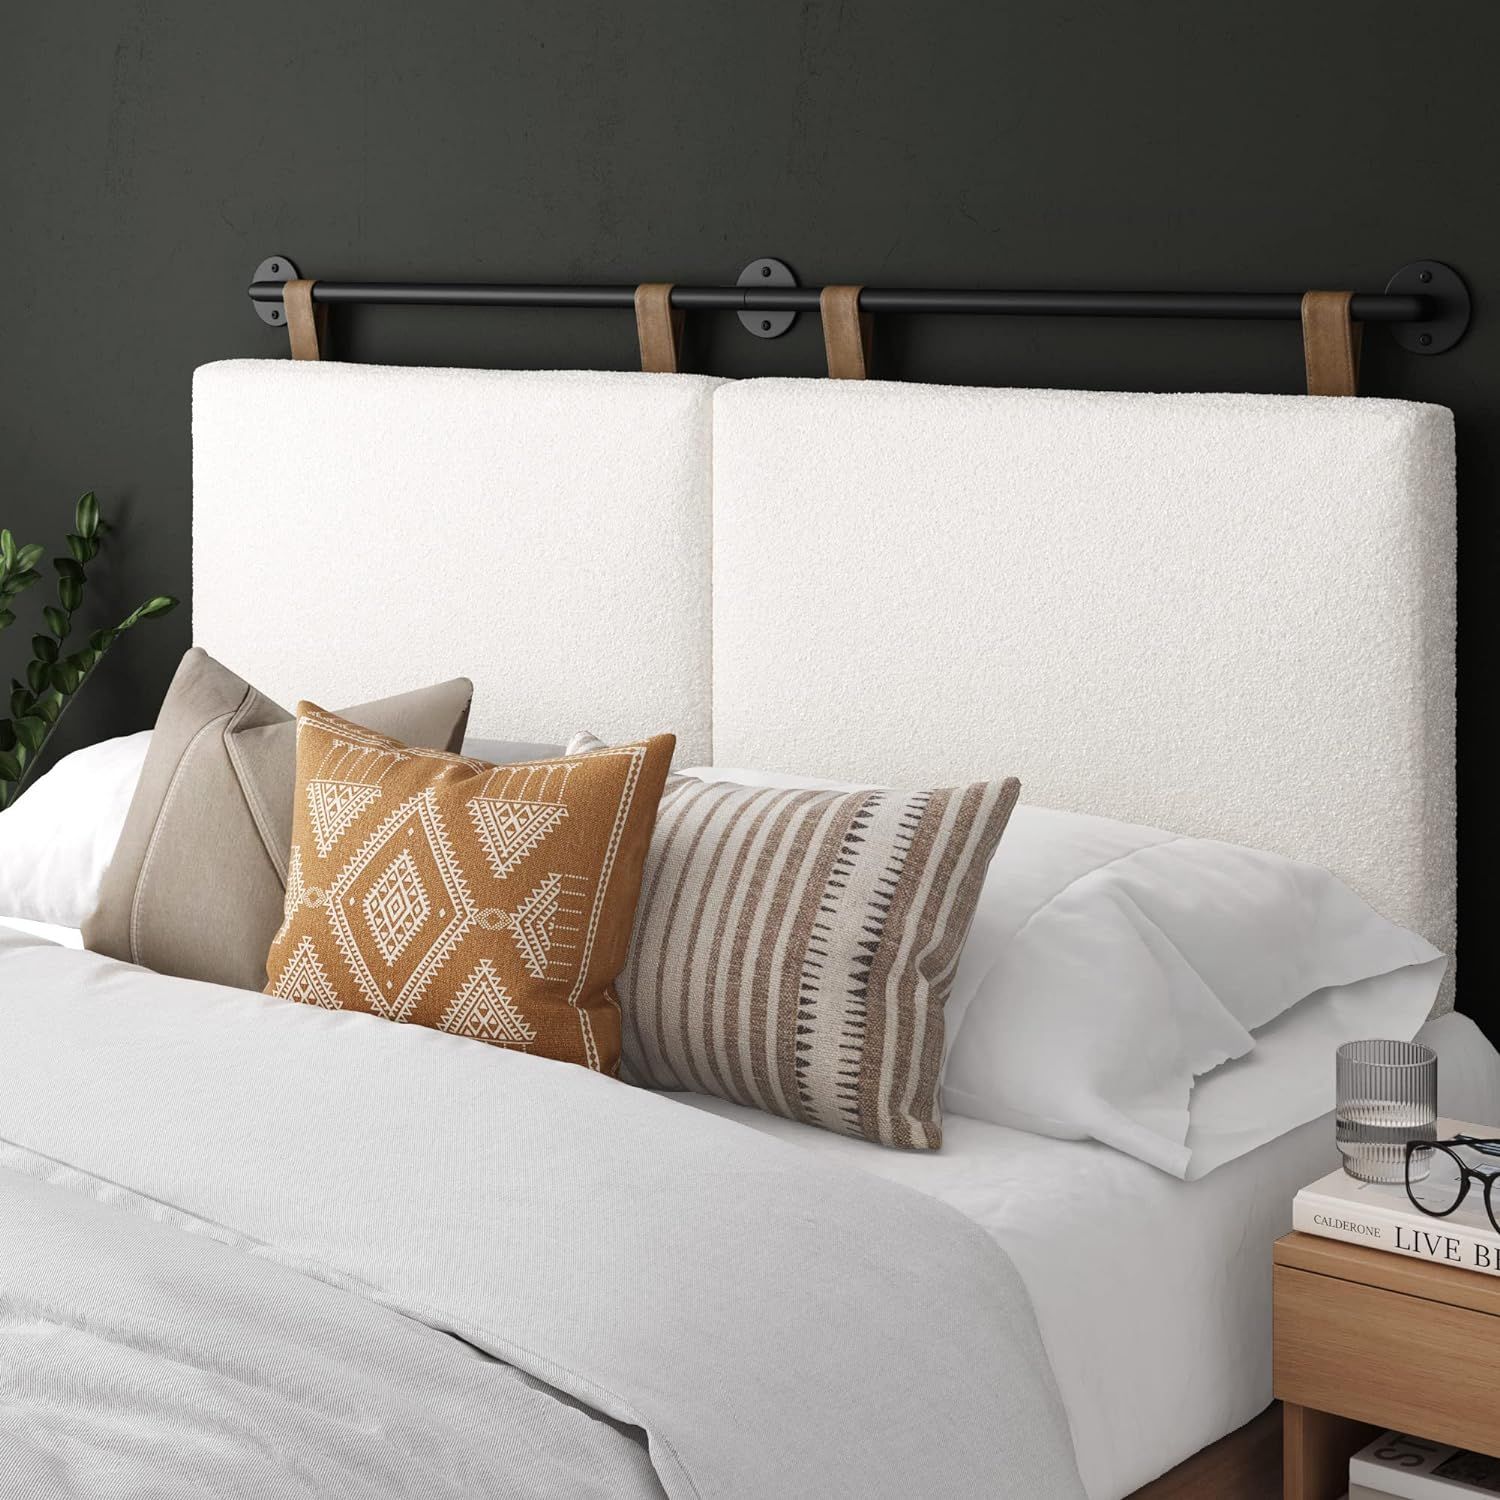 Nathan James Harlow Wall Mount Headboard, Full Queen, White/Black | Amazon (US)